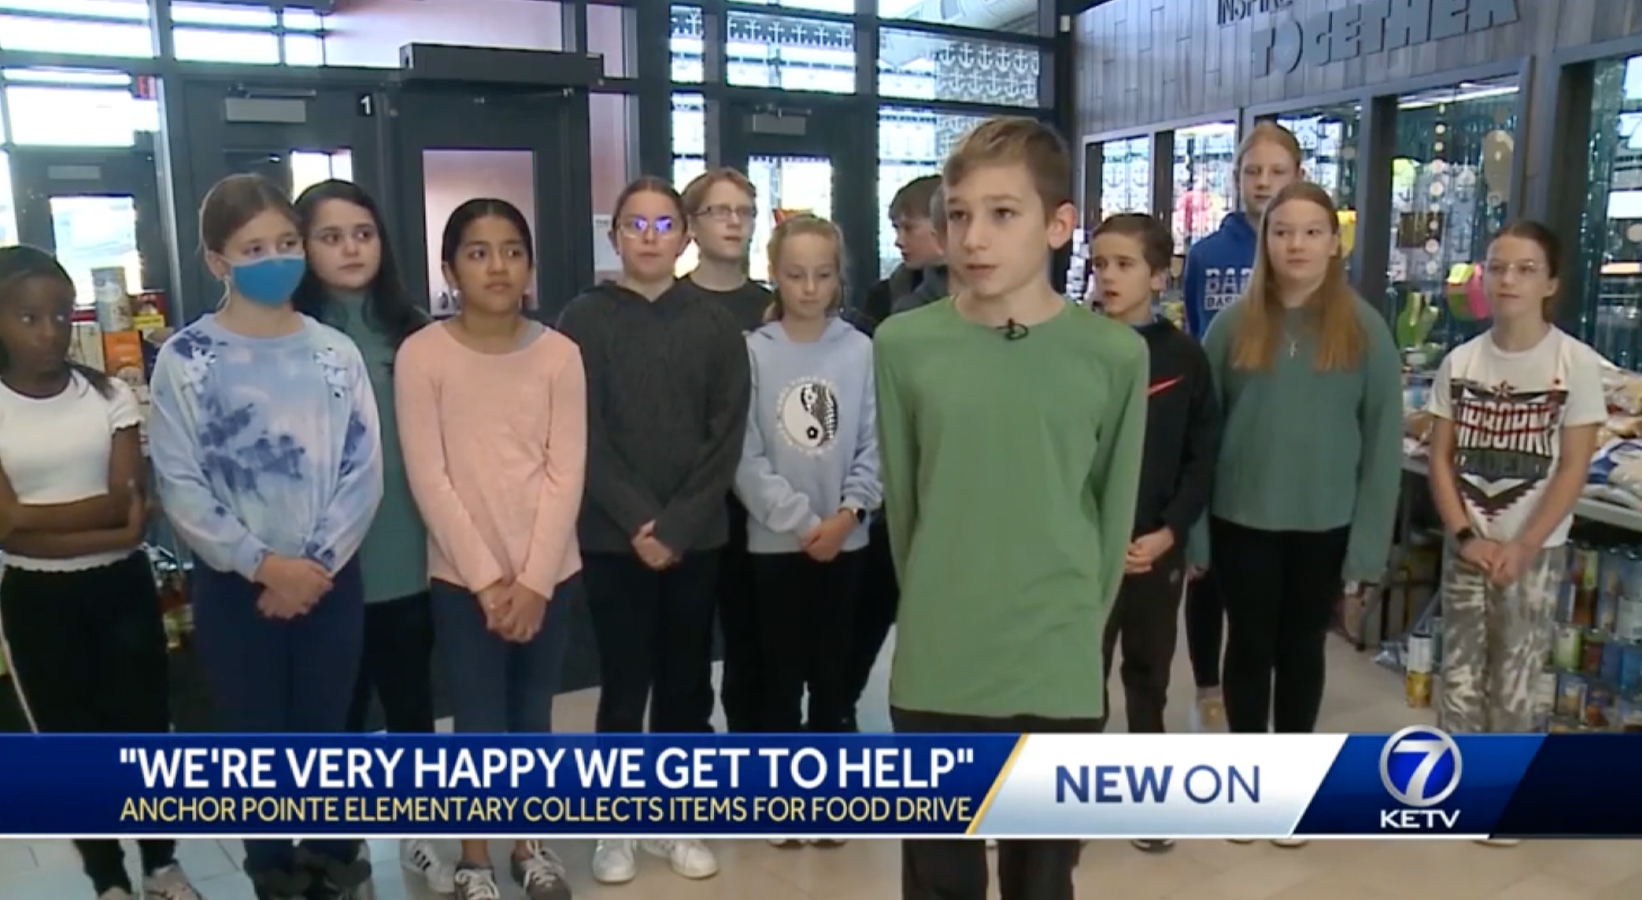 Students from Anchor Pointe Elementary School gather in front of the camera screenshot from KETV's coverage of the story